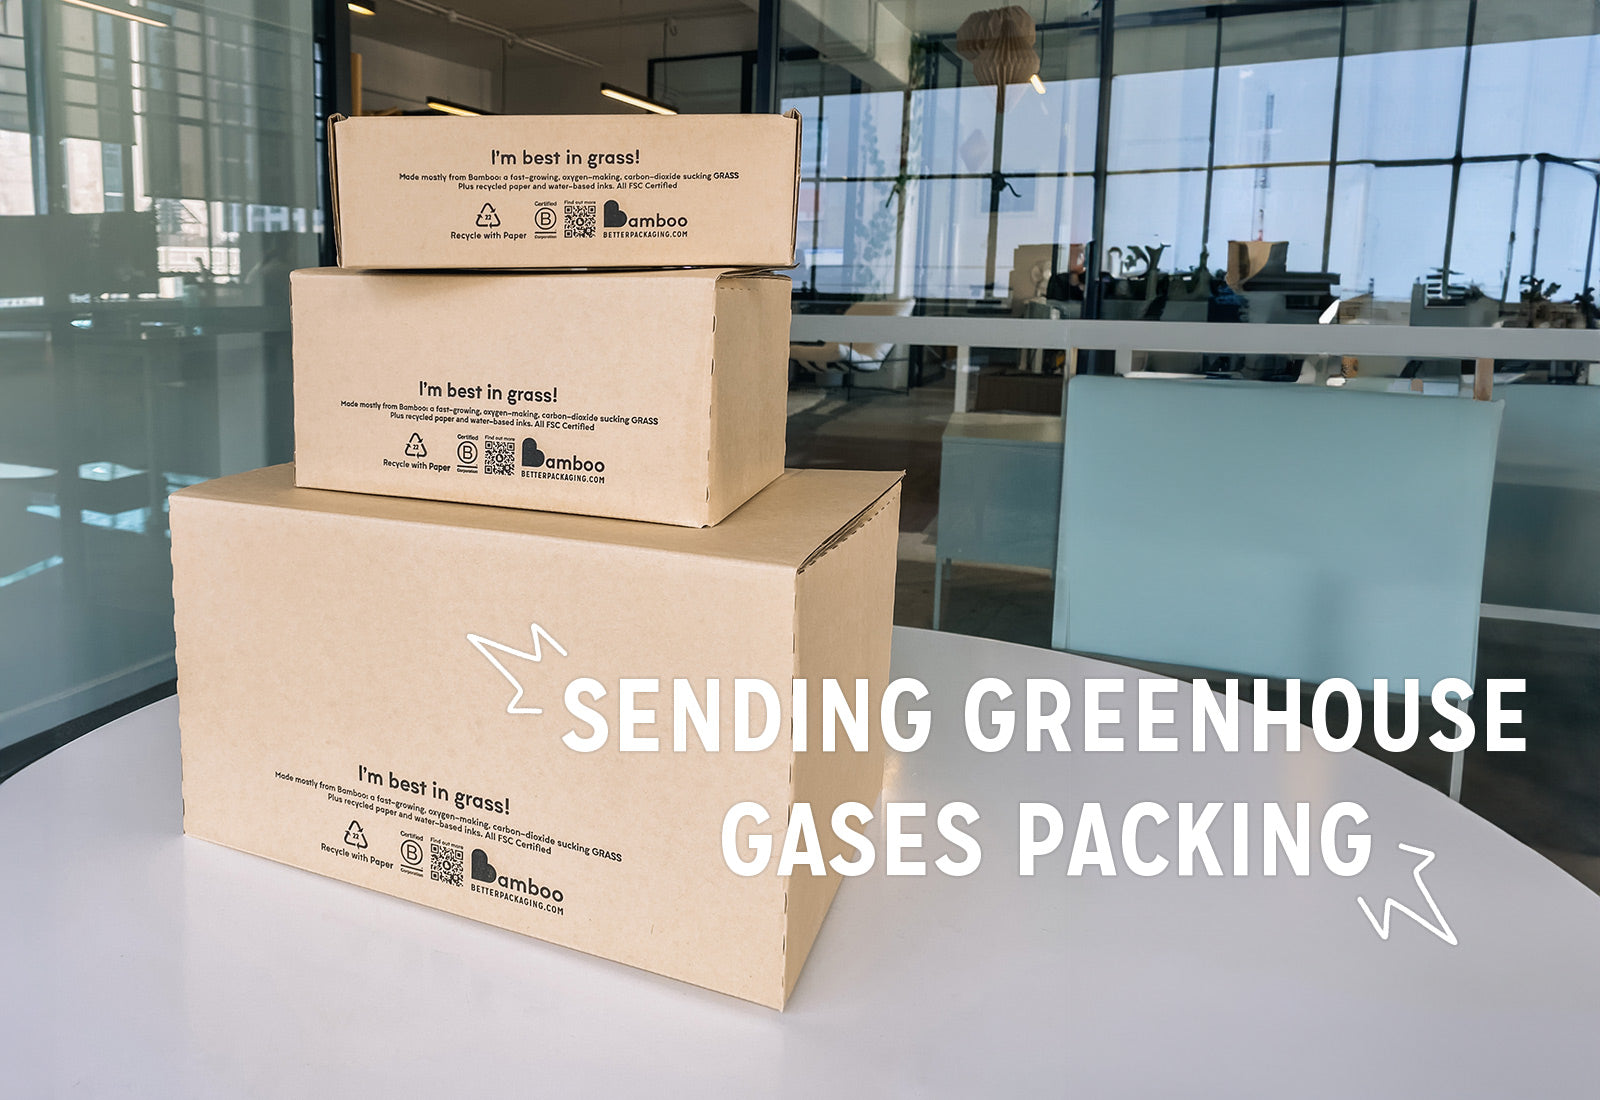 Stacked pile of bamboo boxes with a message "sending greenhouse gases packing" advocating eco-friendly packaging.